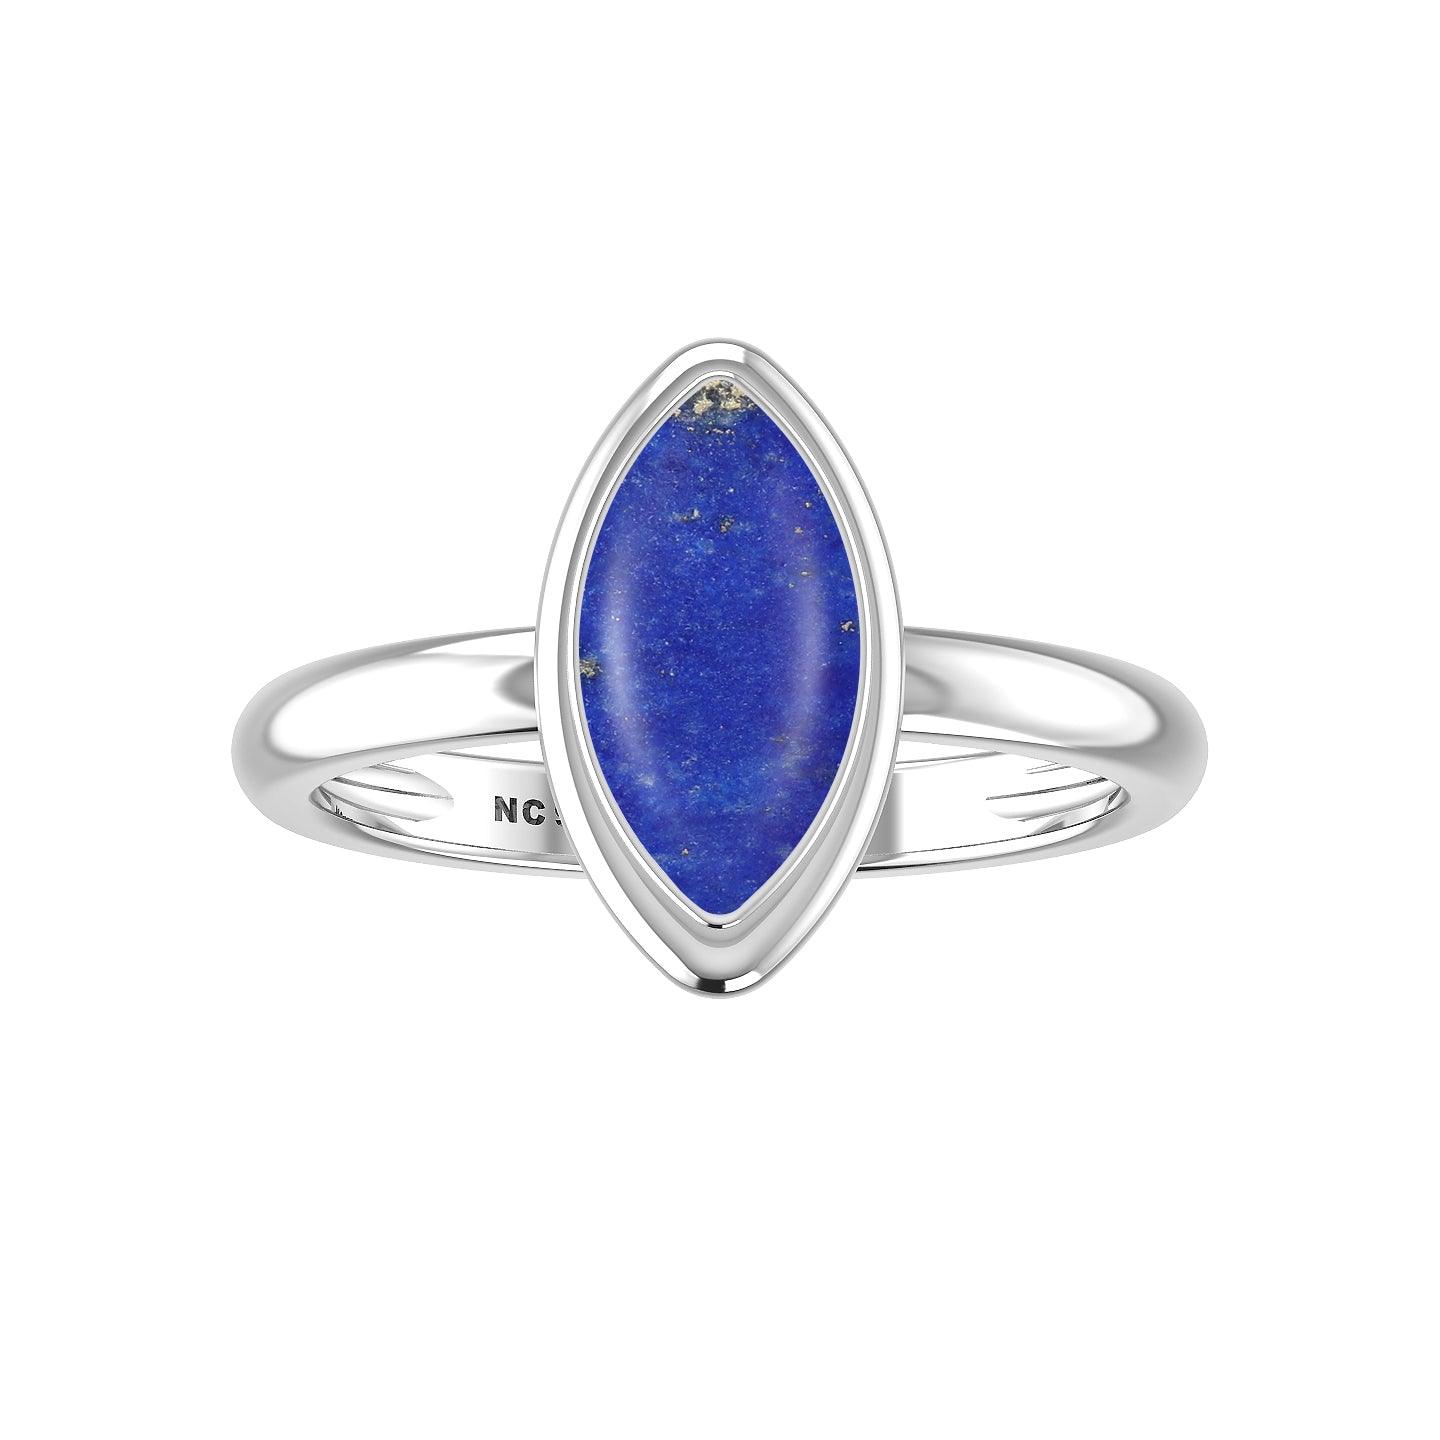 Natural Lapis Lazuli Ring 925 Sterling Silver Ring Handmade Silver Jewelry Pack of 6 - (Box 3)